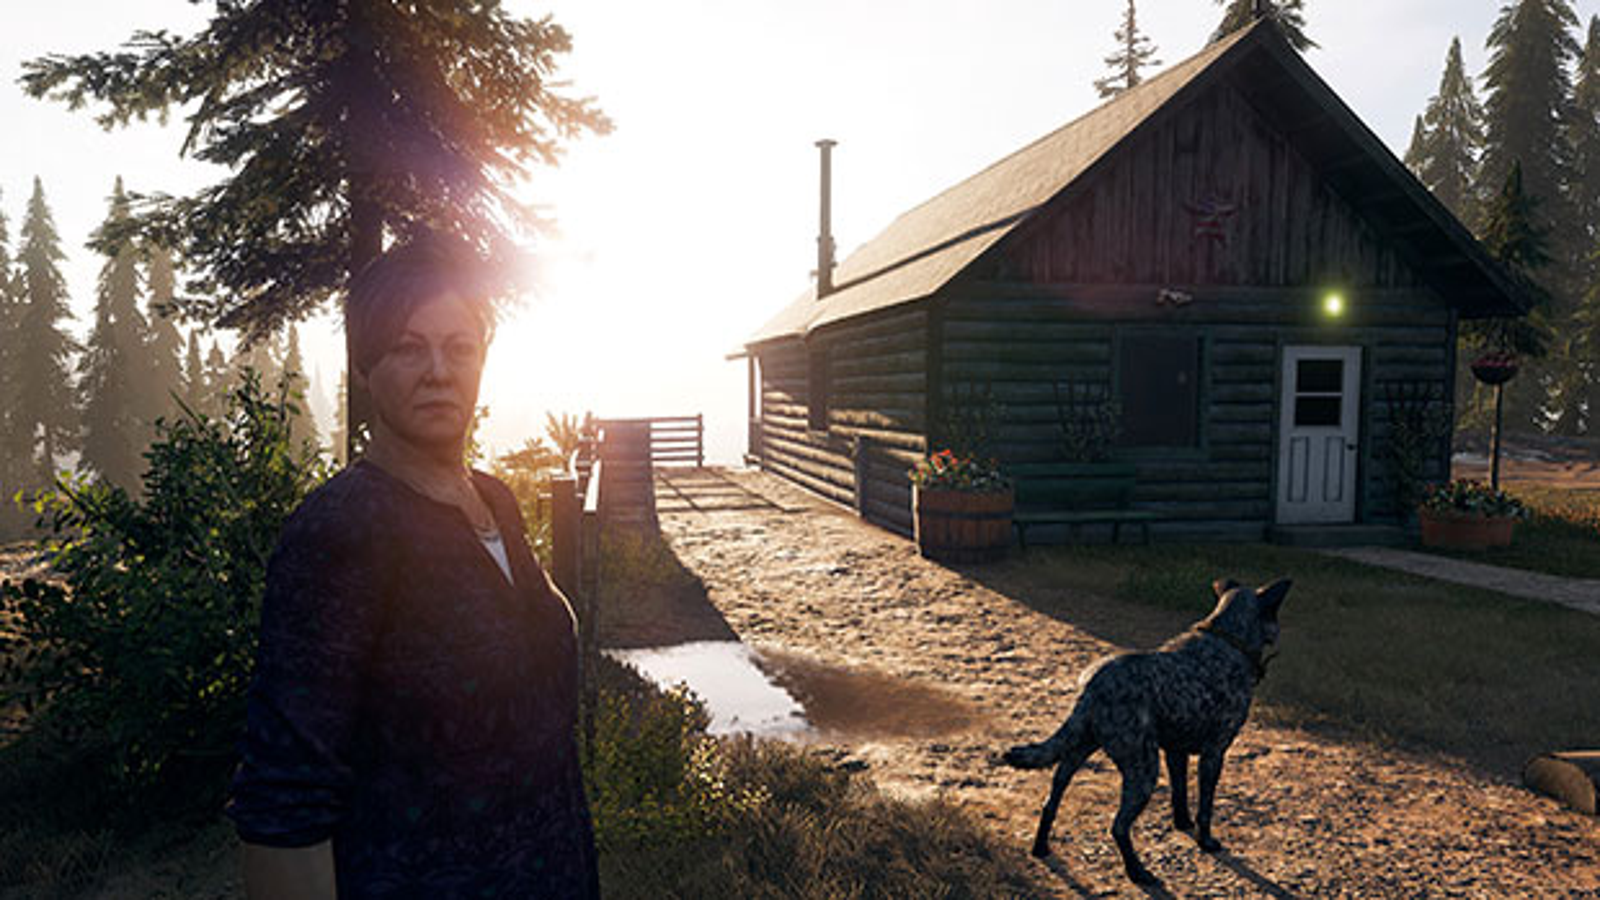 Far Cry 5 On PS4 Is Looking Great But It Has A Few Issues That Need To Be  Ironed Out